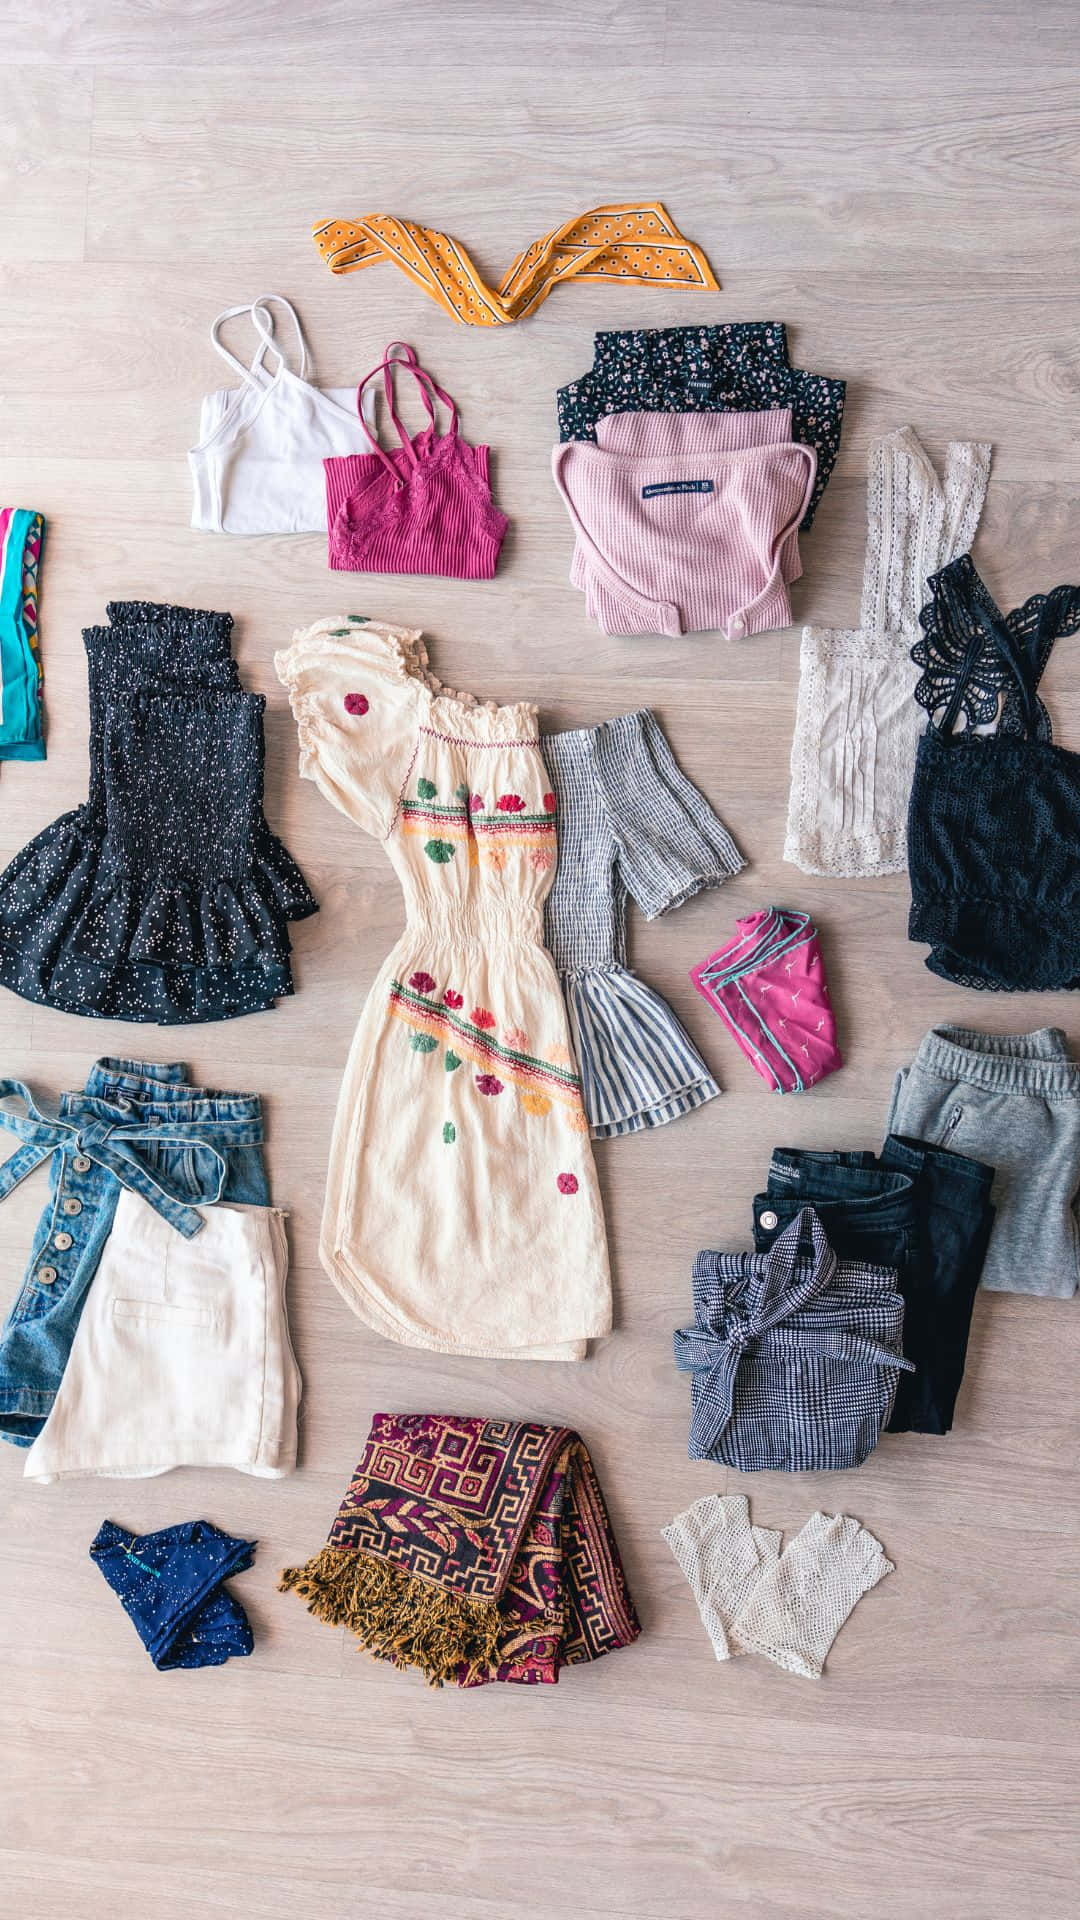 A Collection Of Clothes Laid Out On A Wooden Floor